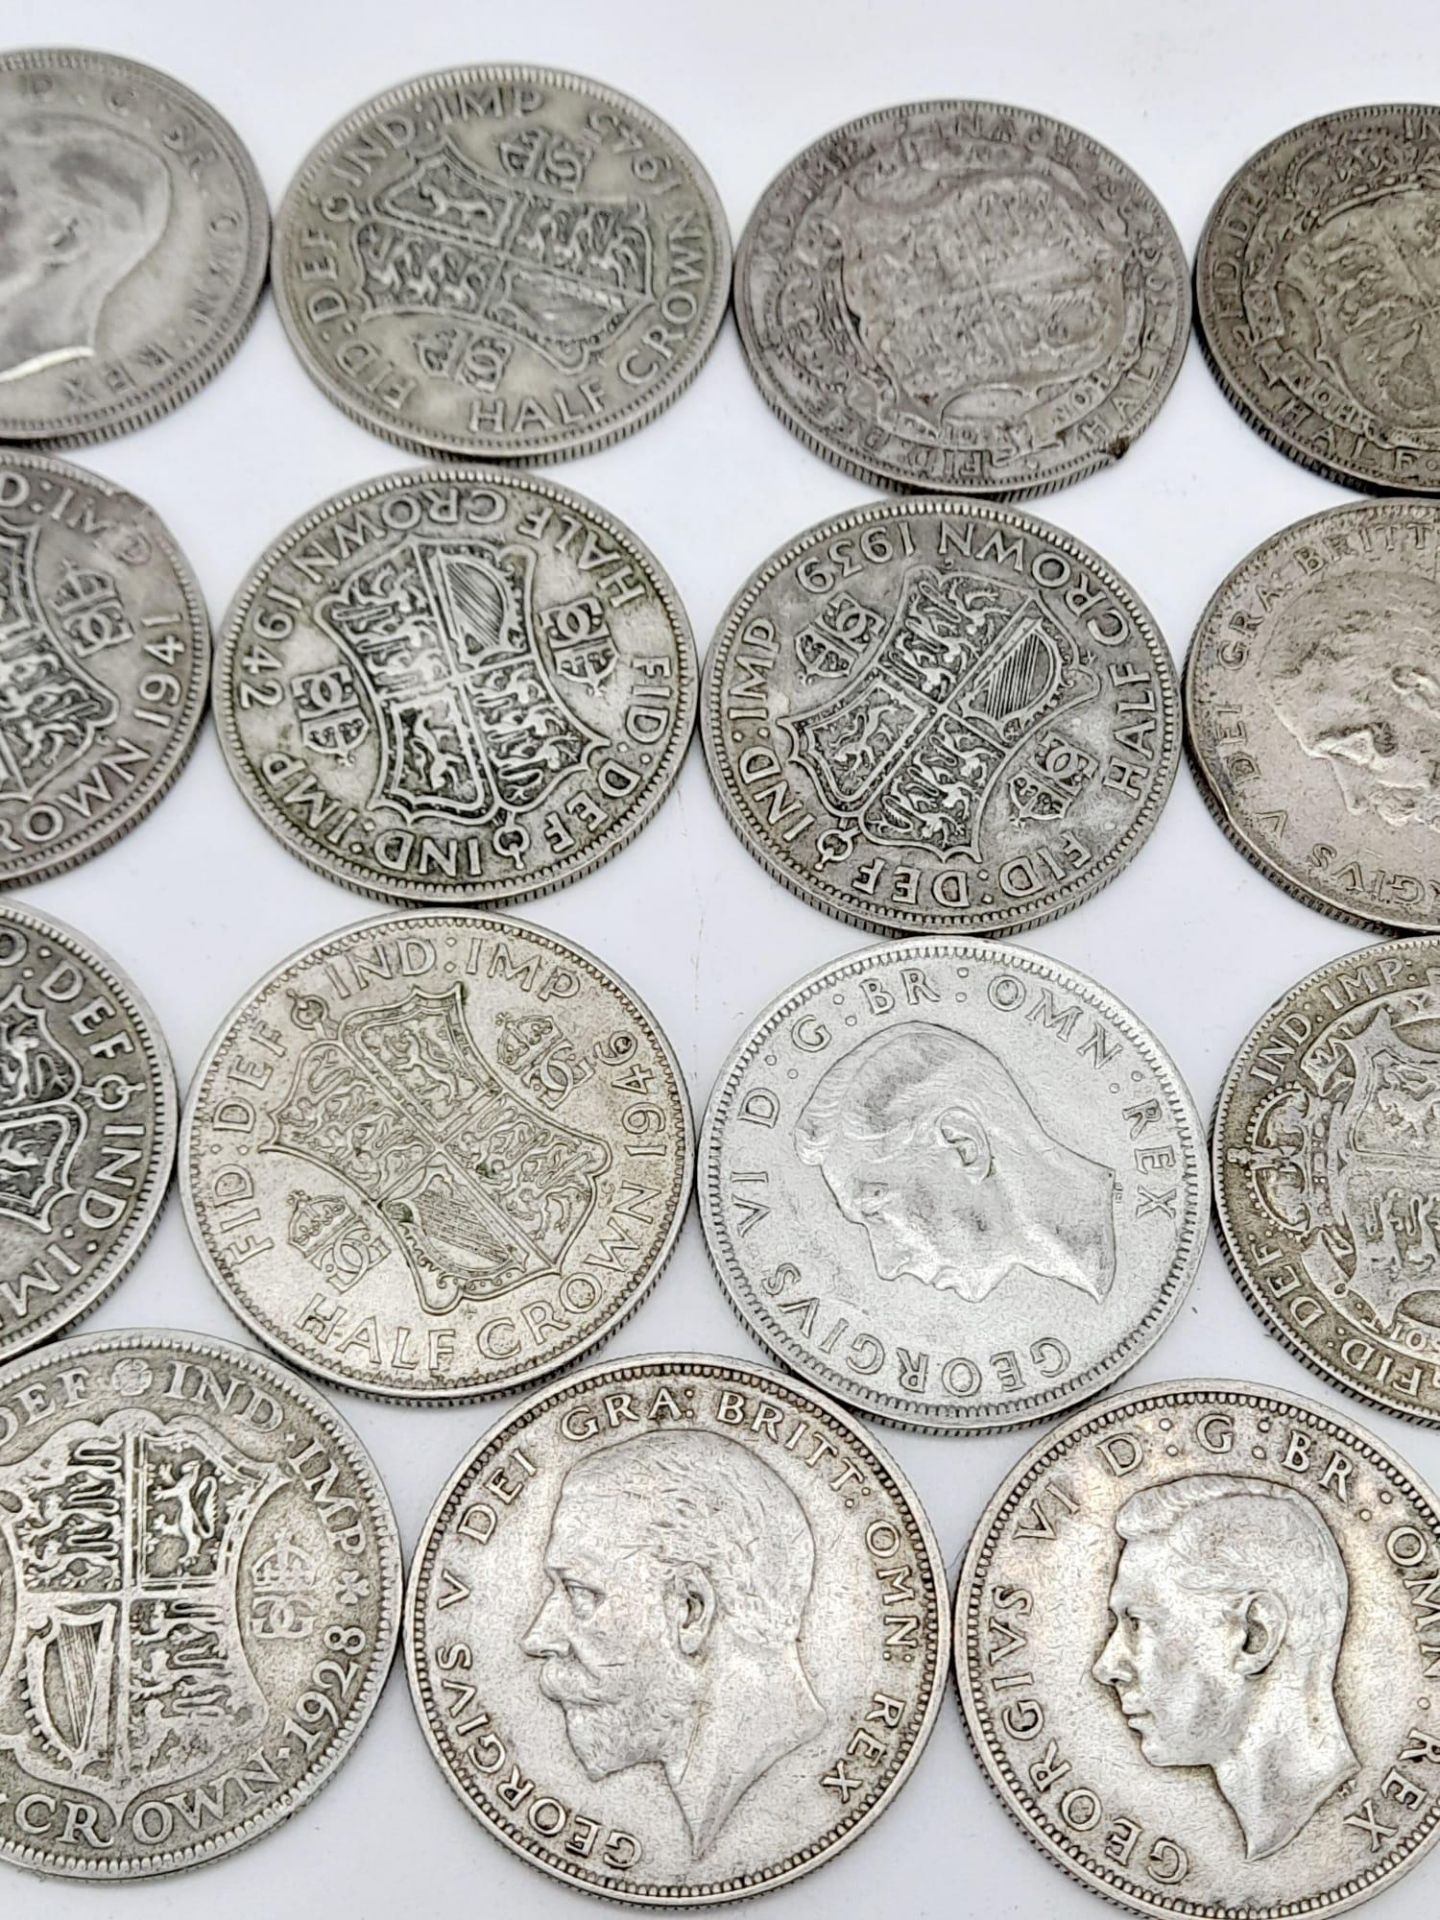 19 Pre 1947 British Silver Half Crown Coins. 265g total weight. - Image 2 of 4